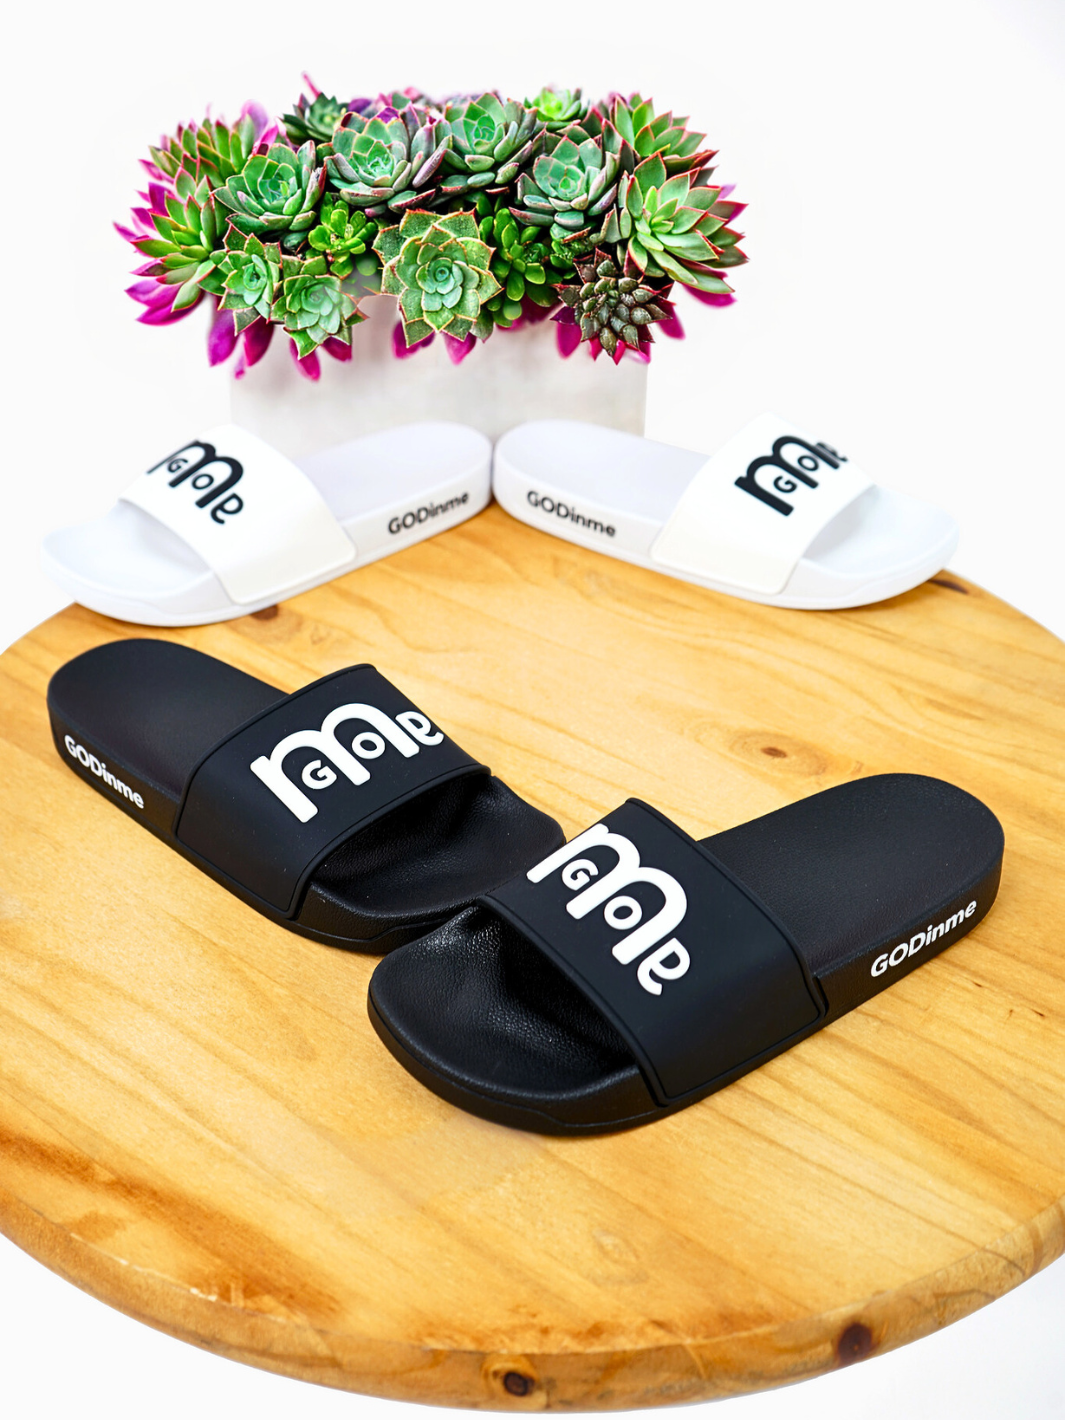 Men's GODinme Slides feature an embossed GODinme logo on front and signature GODinme on the outside heels.